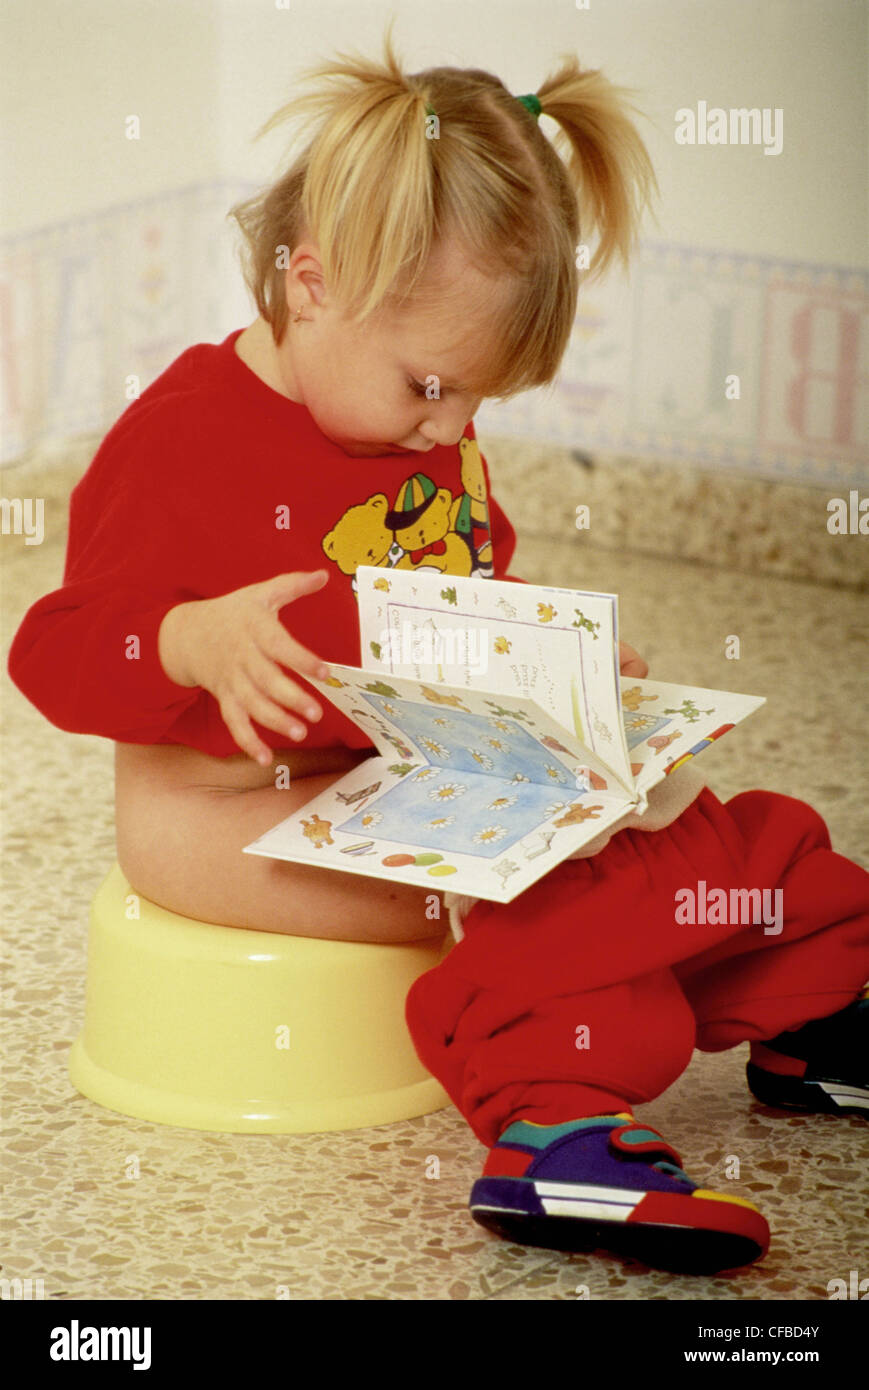 Female child with blonde hair in bunches sitting on potty reading book  Stock Photo - Alamy